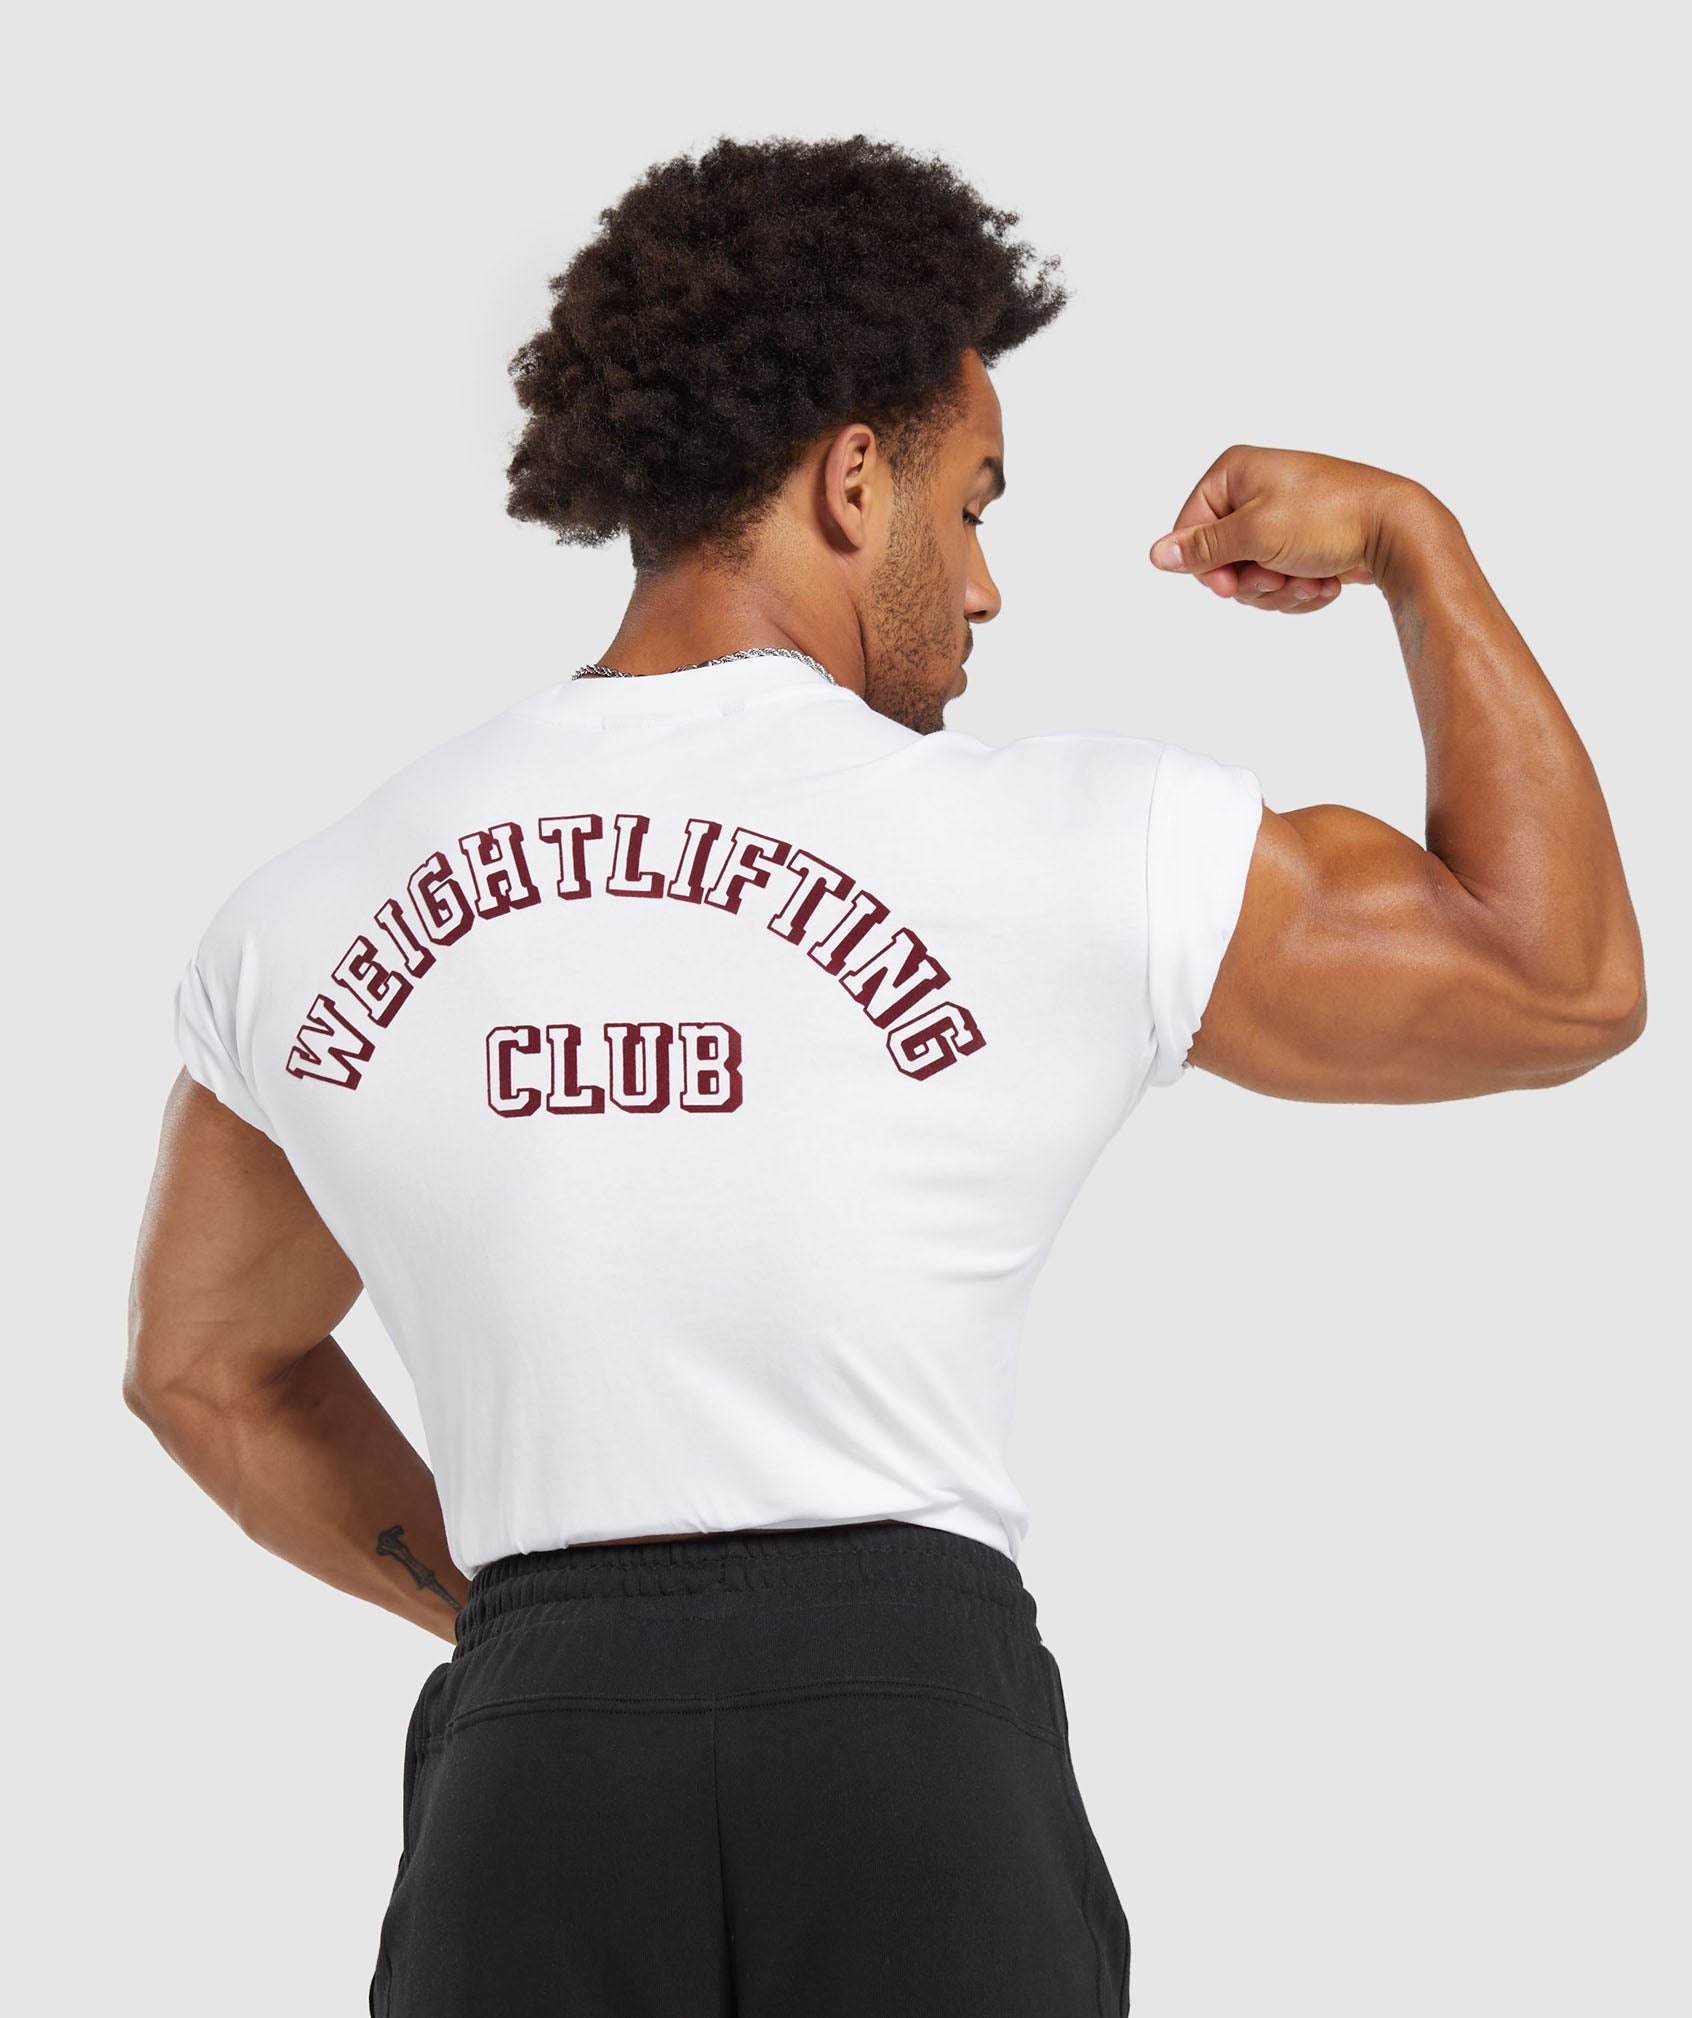 Weightlifting Club T-Shirt in White - view 4